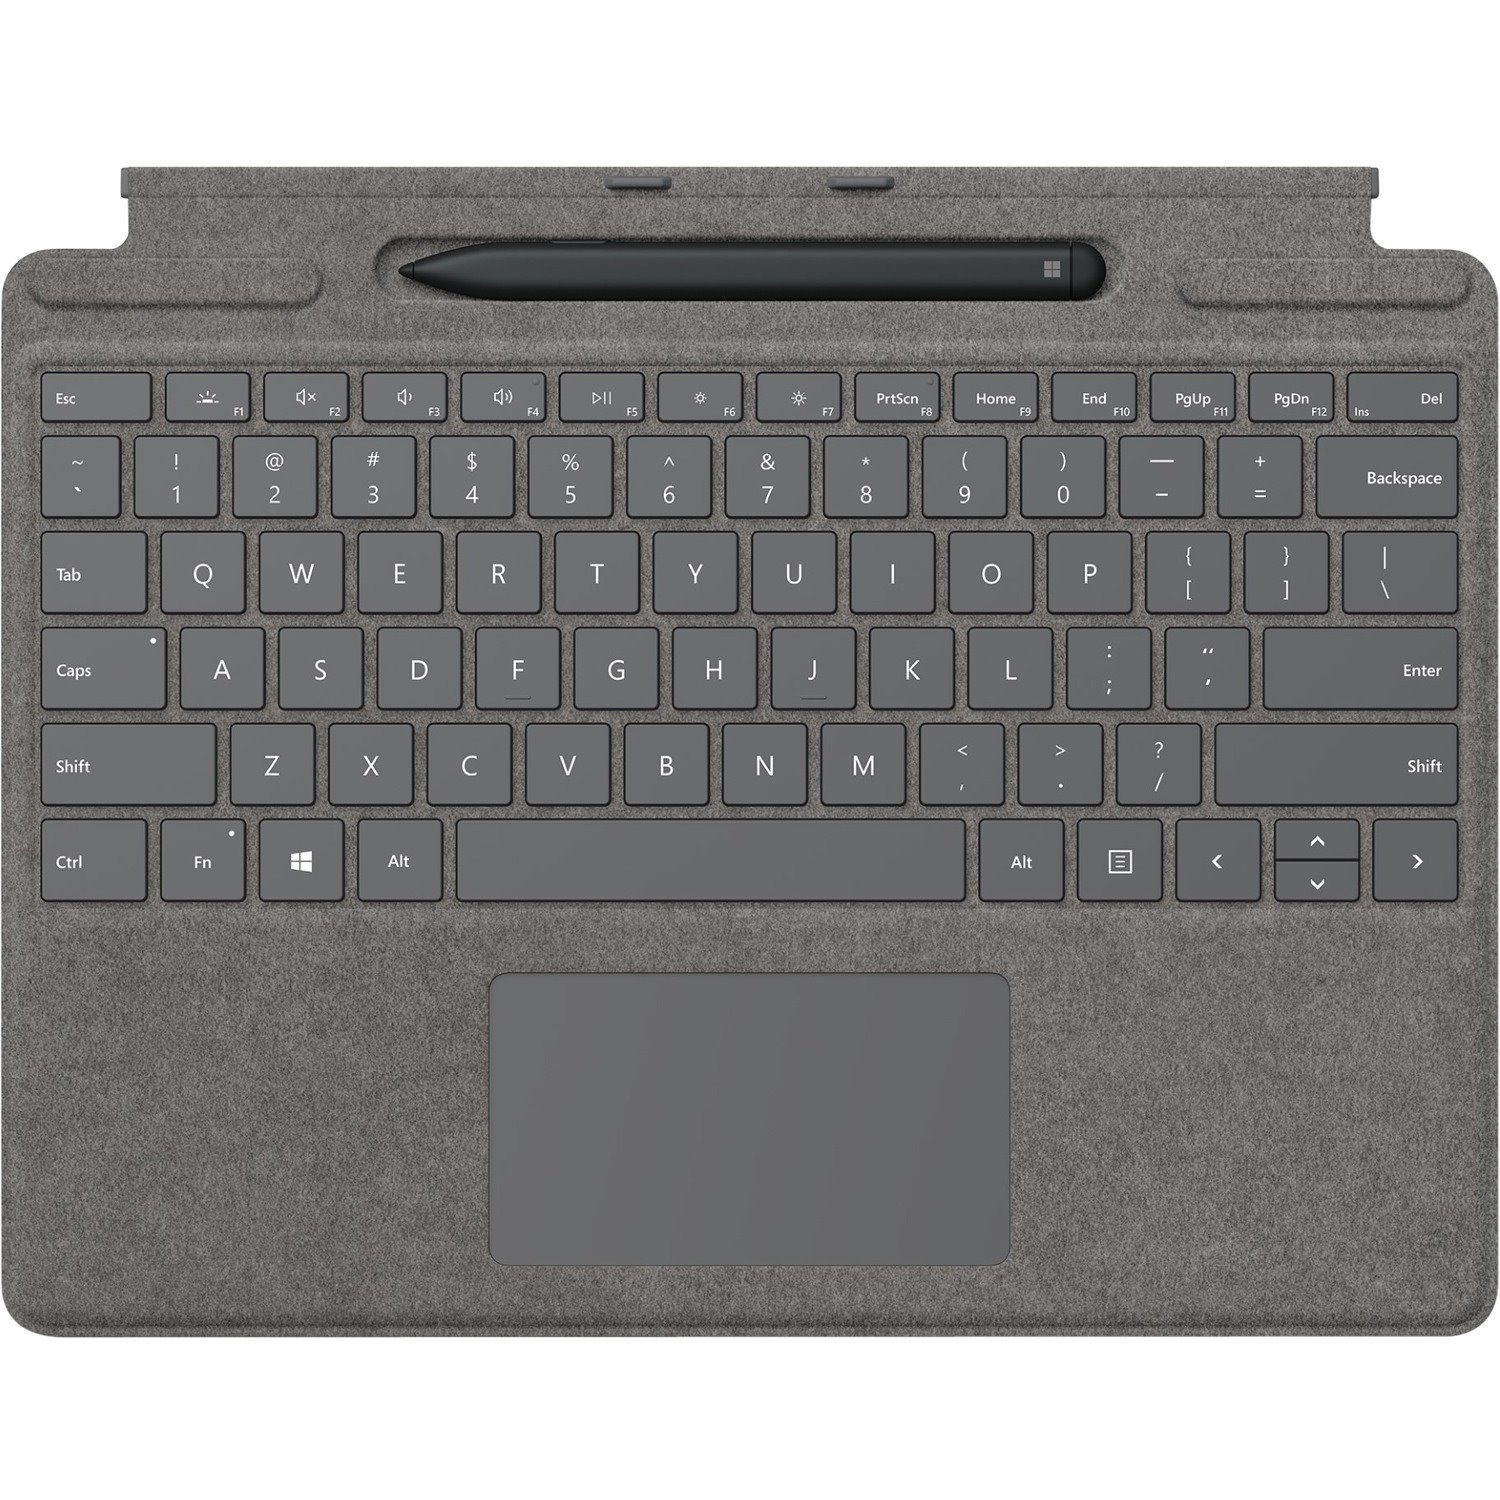 Microsoft Surface Keyboard/Cover Case Microsoft Surface Pro X Tablet - Concrete